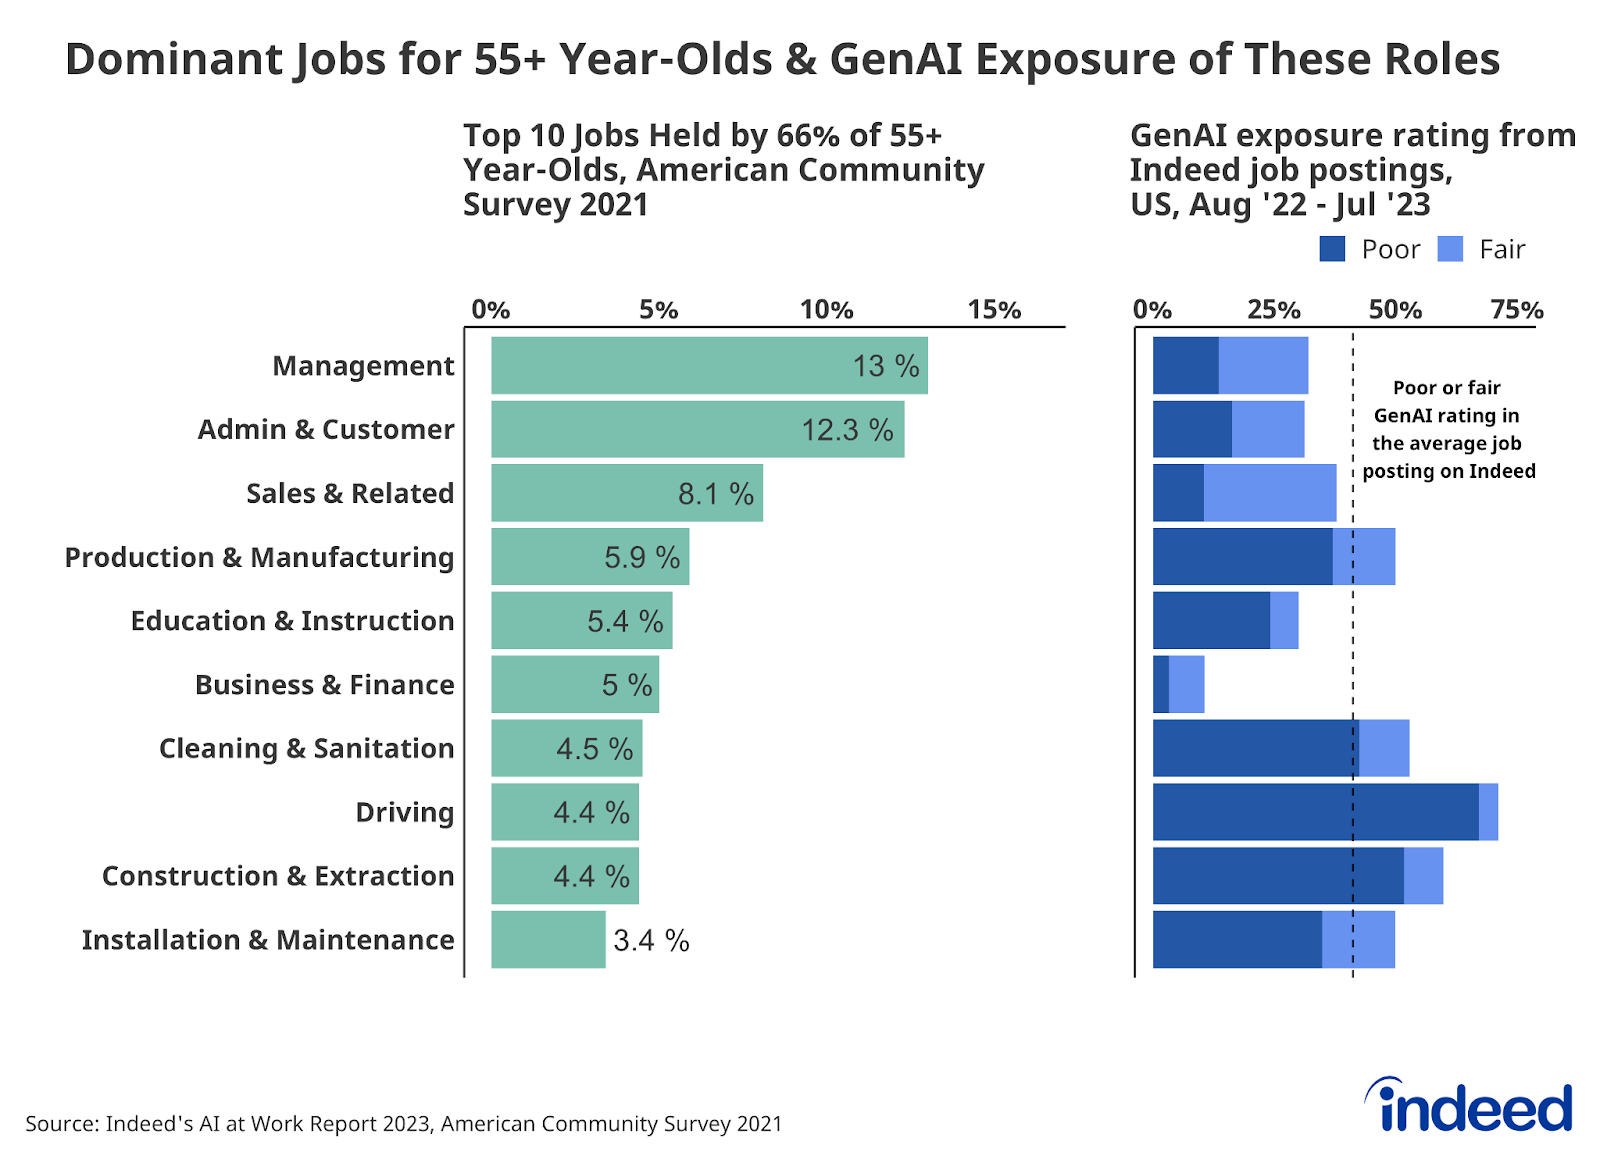 A series of two bar graphs titled "Dominant jobs for over 55-year-olds & GenAI exposure of these roles," shows the top 10 jobs held by 66% of those 55 and older and the corresponding GenAI exposure rating of those jobs. Management was the most common type of job at 13%, while Installation & Maintenance was the rarest. 